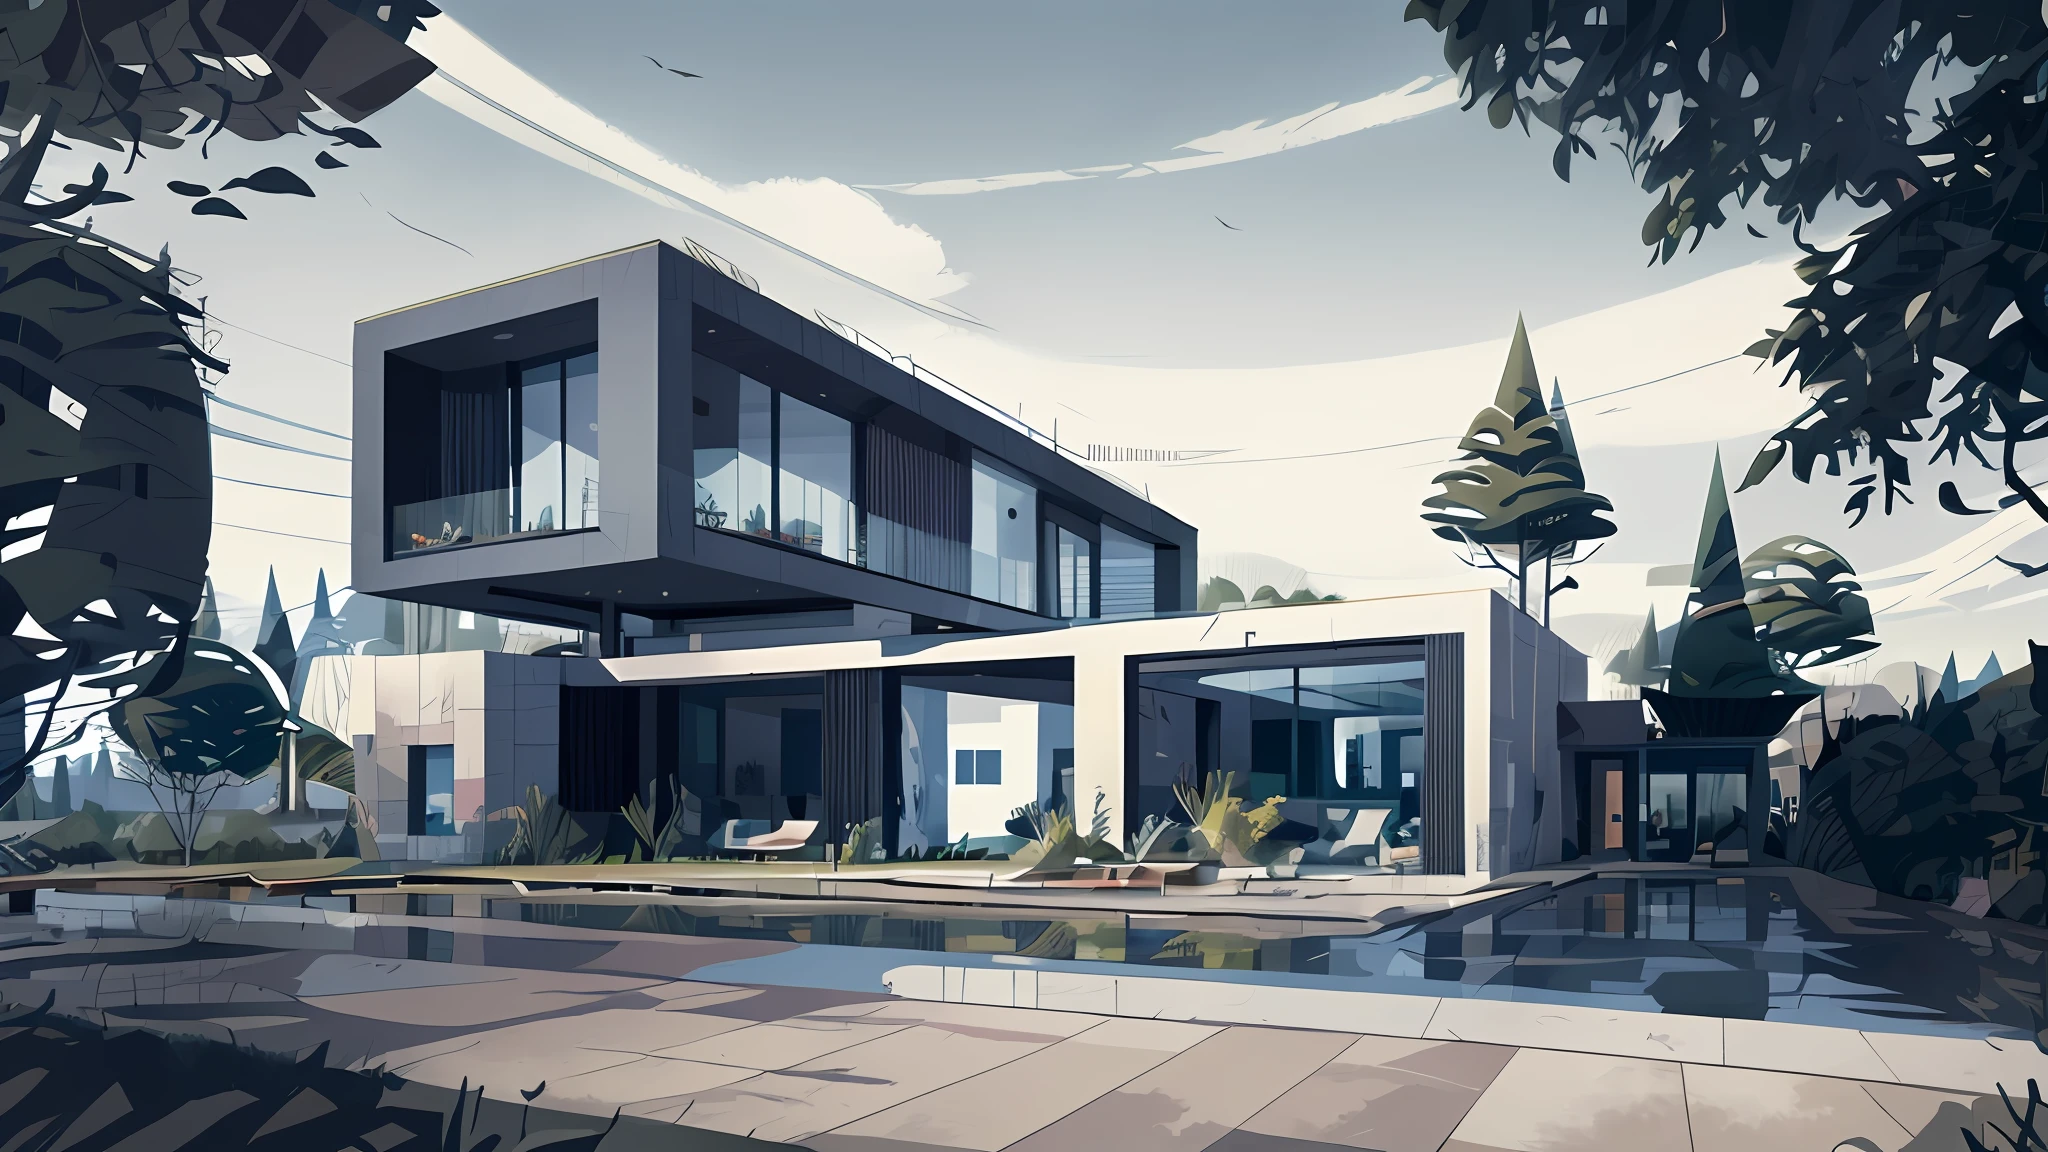 Surrealistic, illustration, architecture building, exterior, many trees, street, car, people